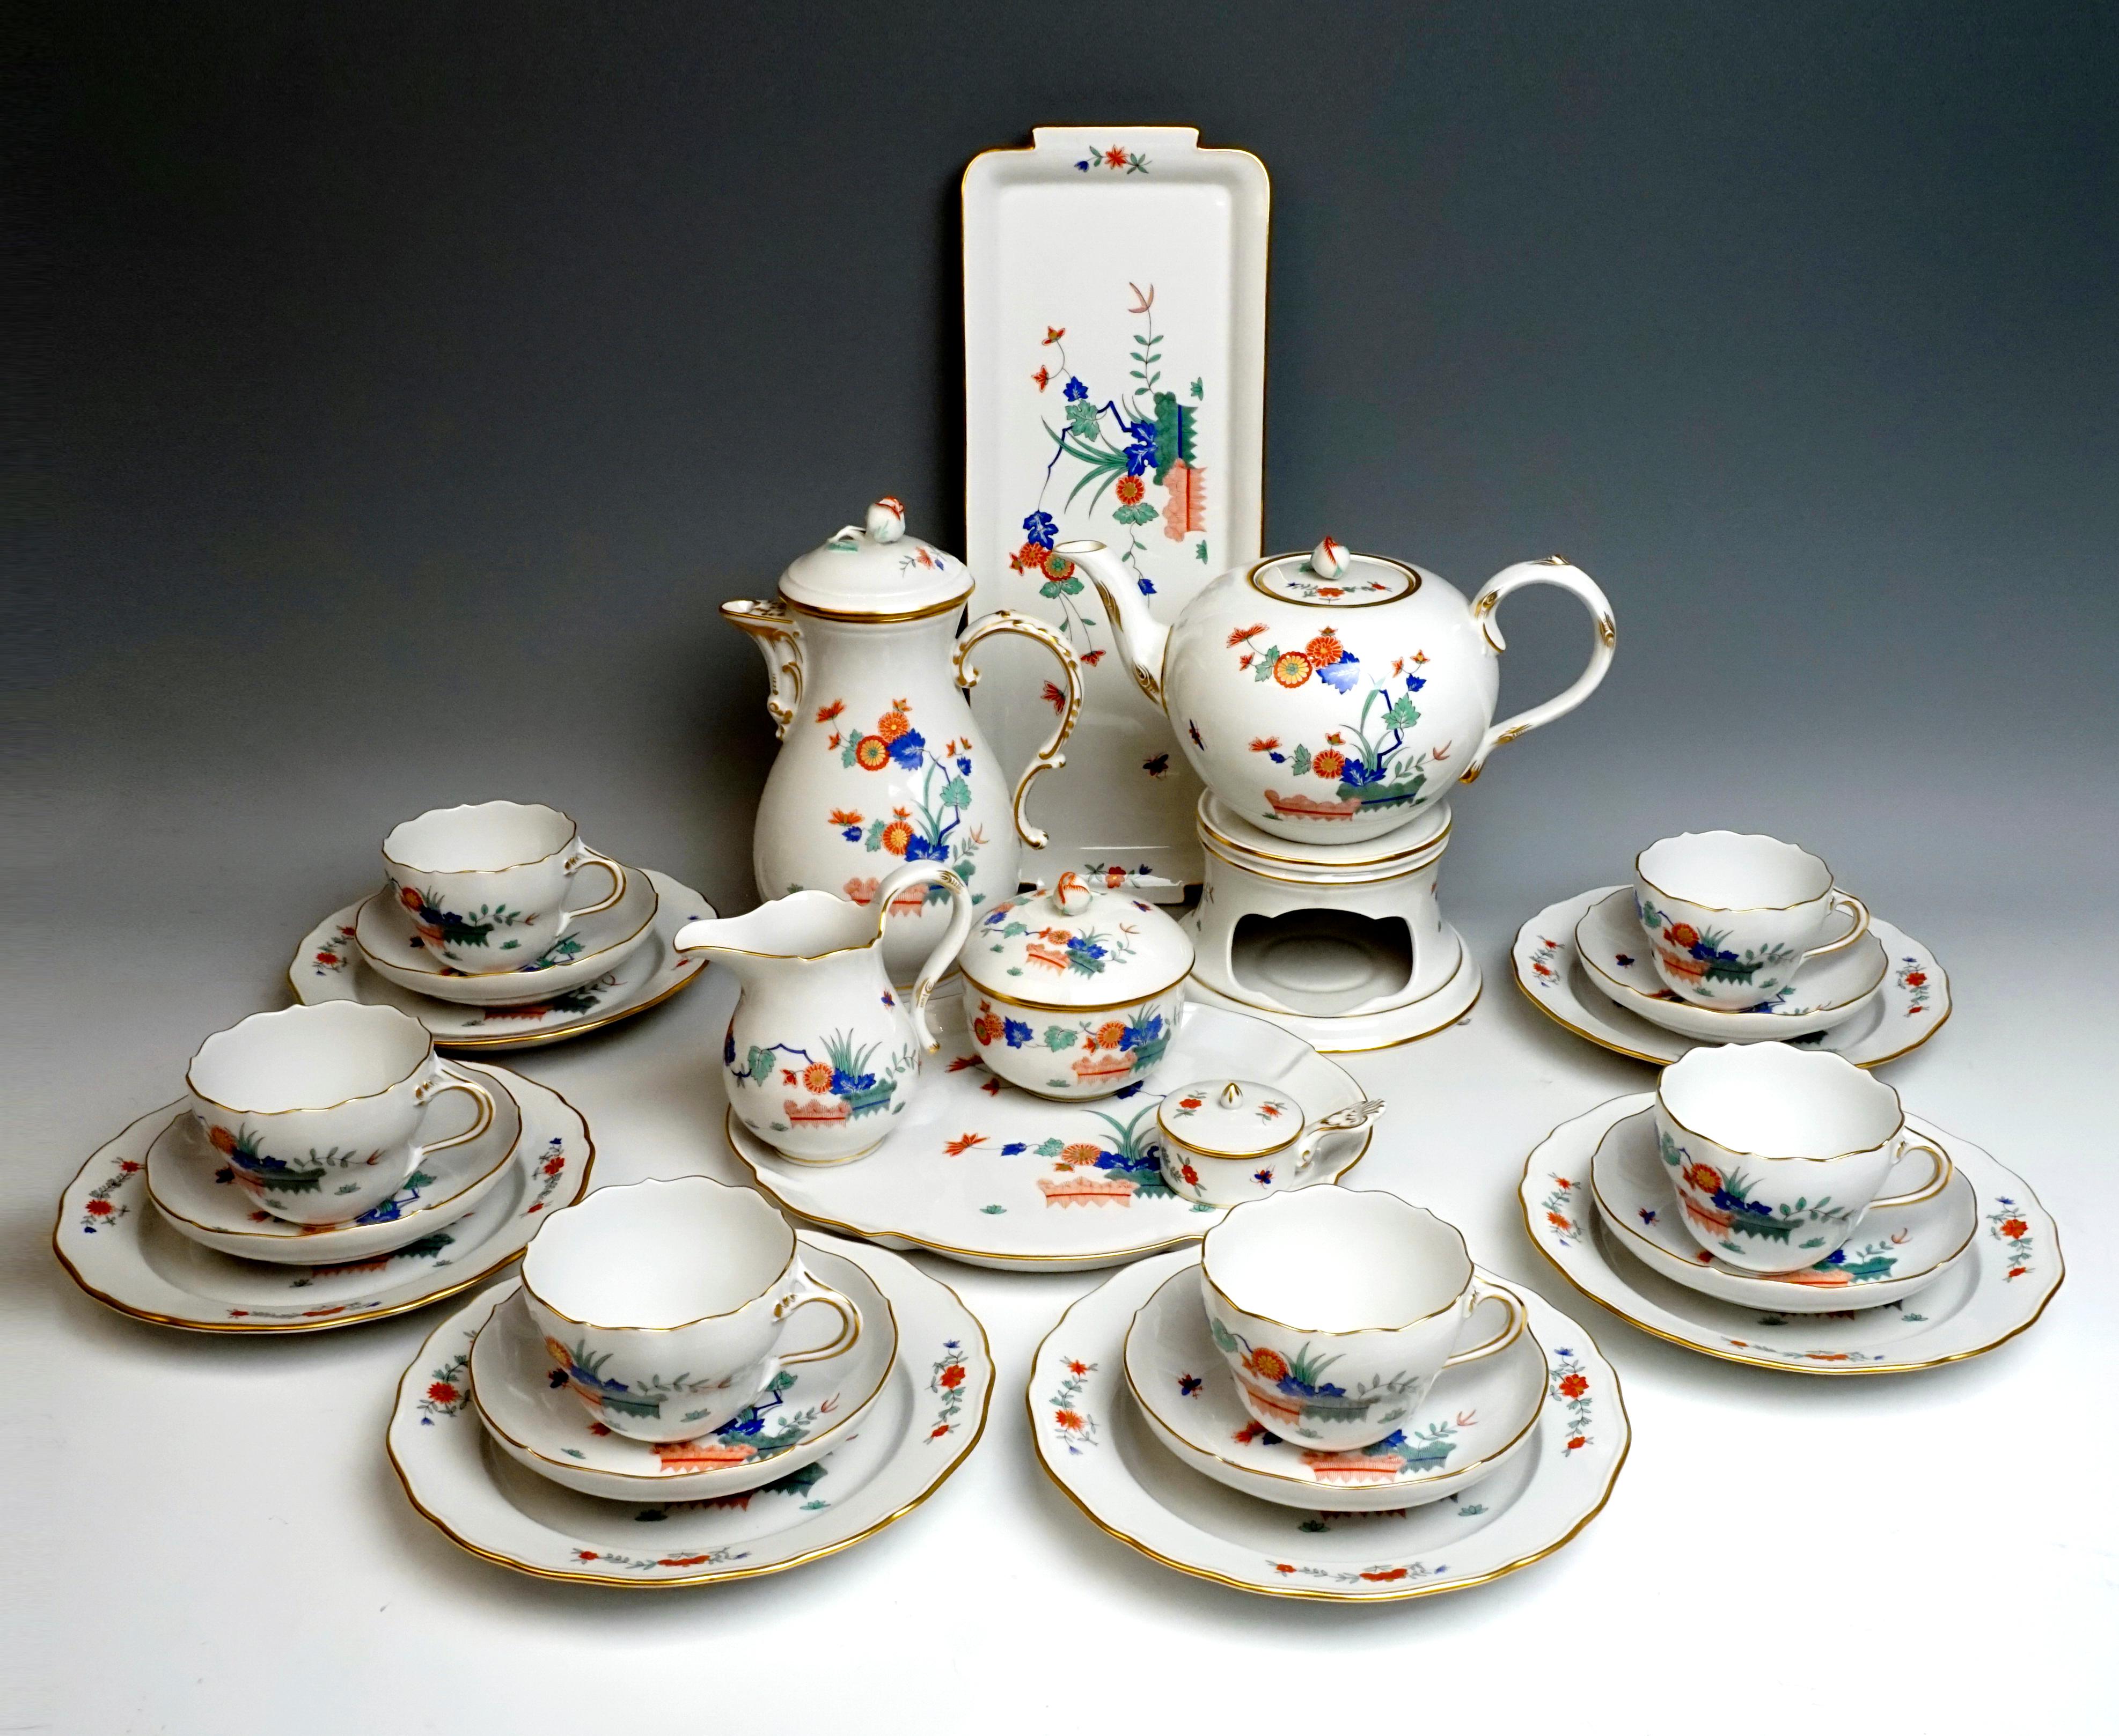 Finest porcelain set From The Meissen/Germany Manufactory

Dating: made second half of the 20th century
Material: white porcelain, glossy finish
Technique: handmade porcelain, finest painting

25 pieces:
1 coffee pot, lidded - height = 9.84